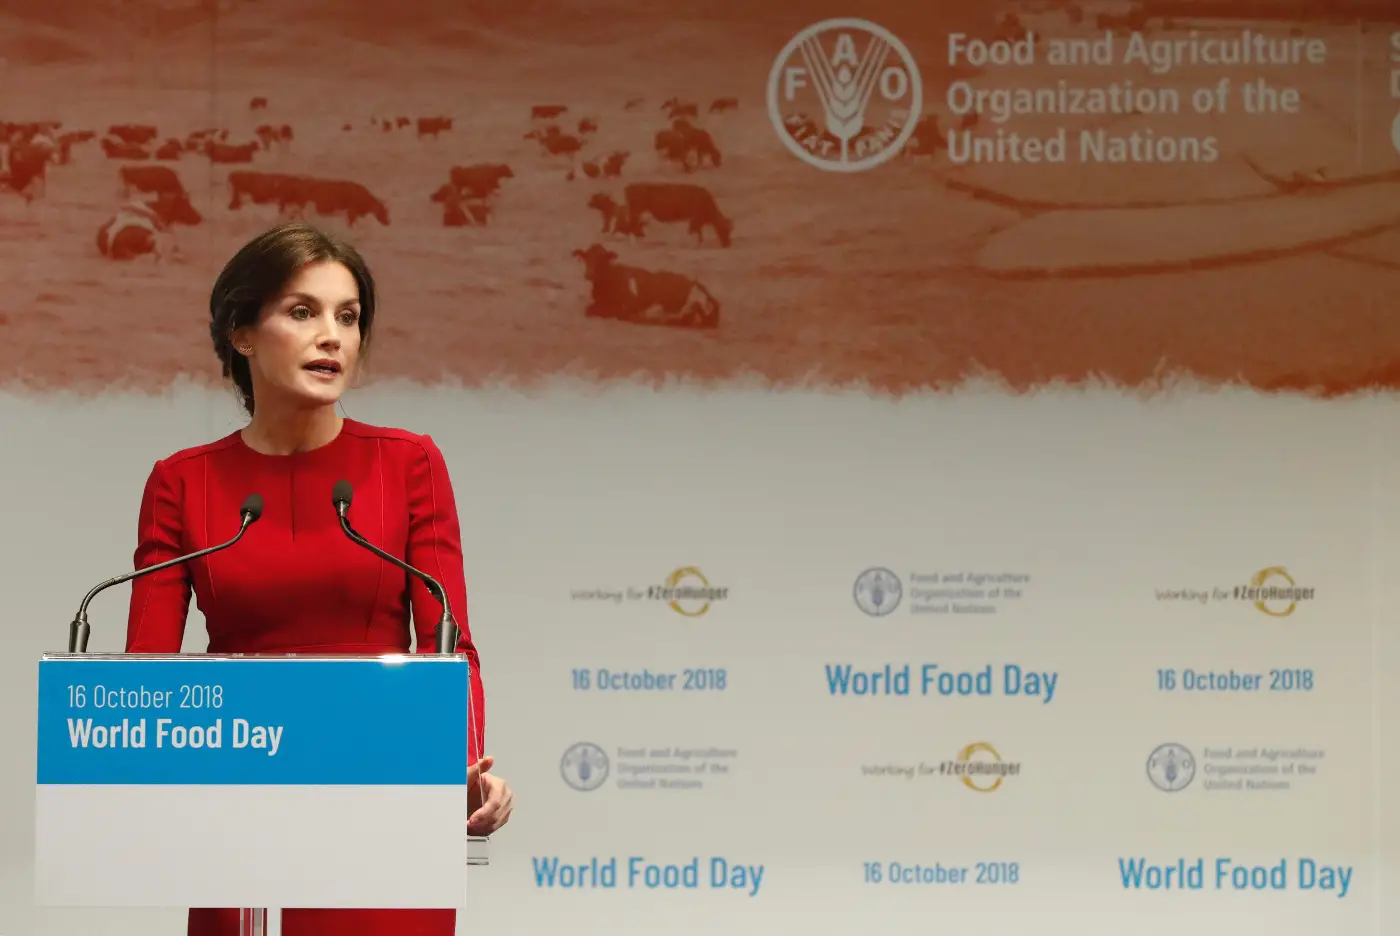 Queen Letizia of Spain attended World Food Day